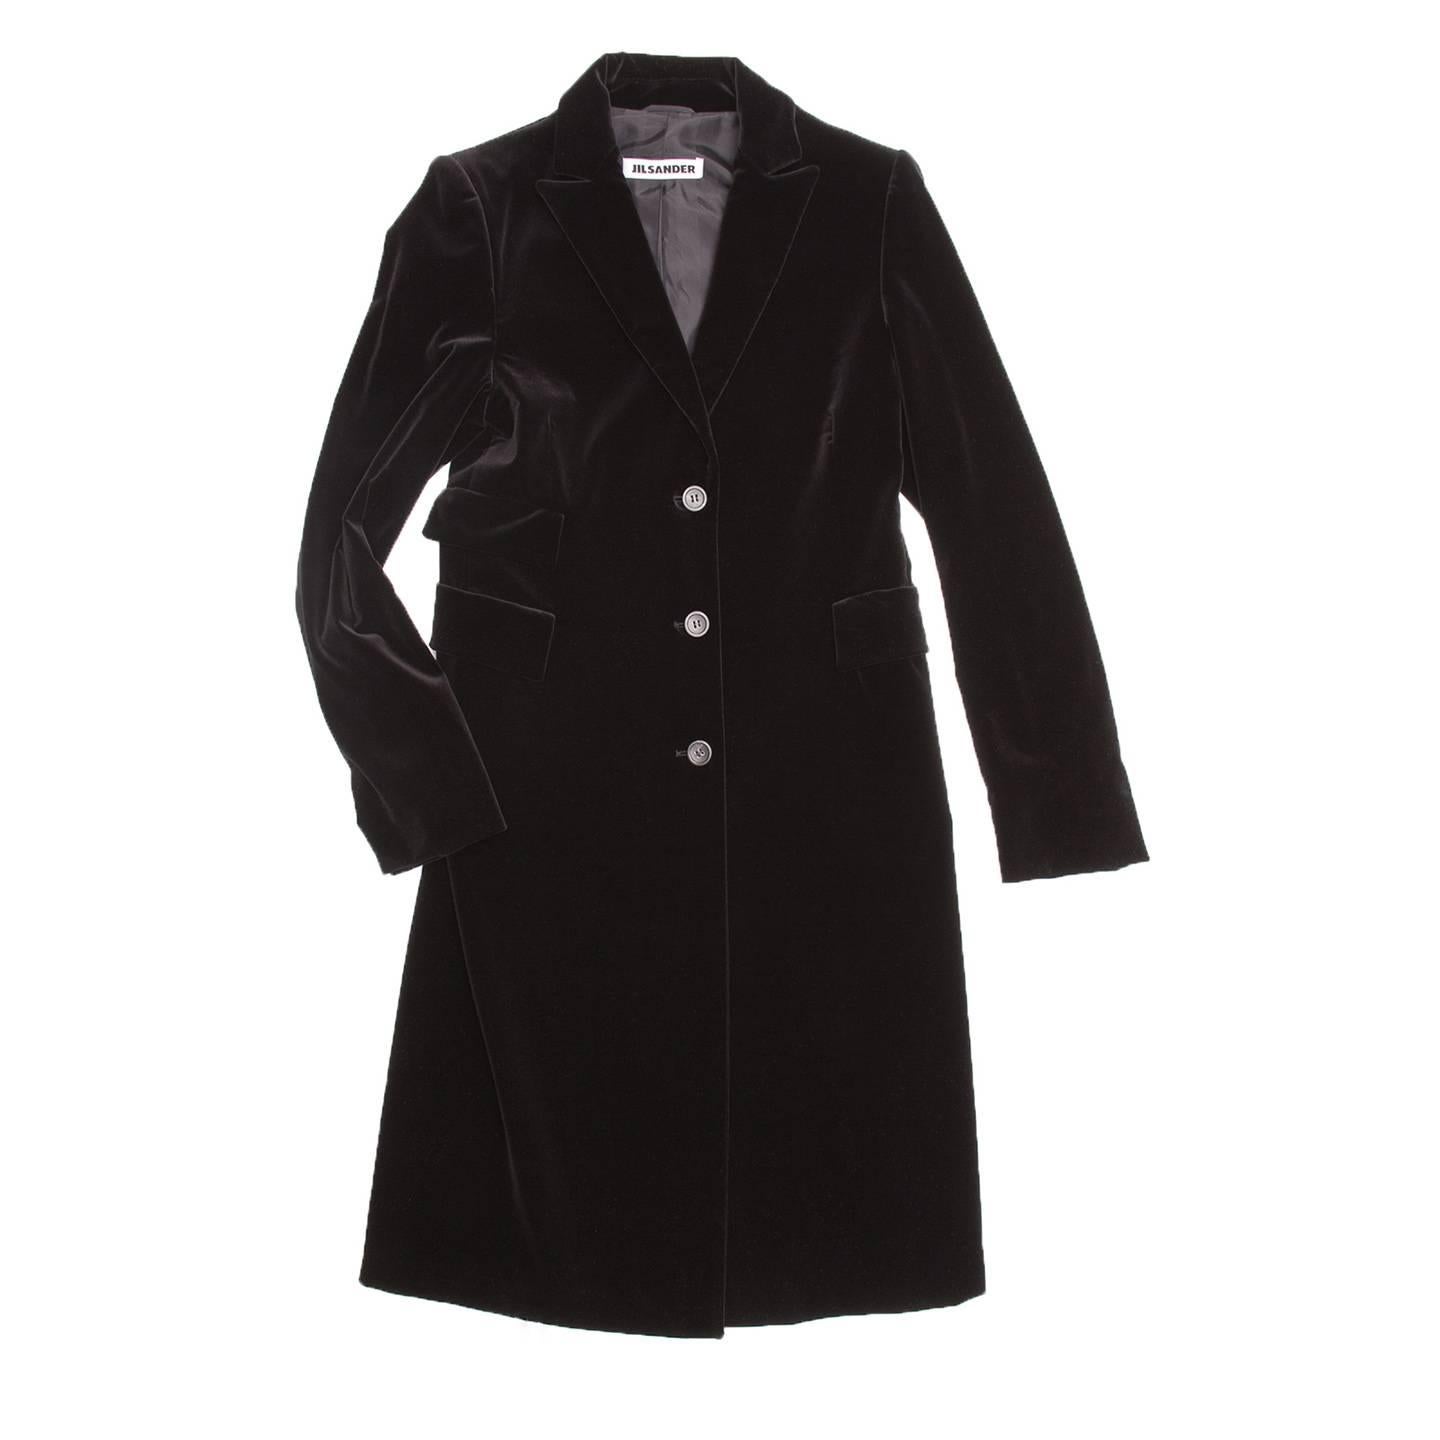 Black cotton velvet knee length coat. Small peaked lapel, three front pockets with squared elegant flaps. Single breasted closure with three buttons. Long back vent starting at hips.

Size  40 French sizing

Condition  Excellent: never worn